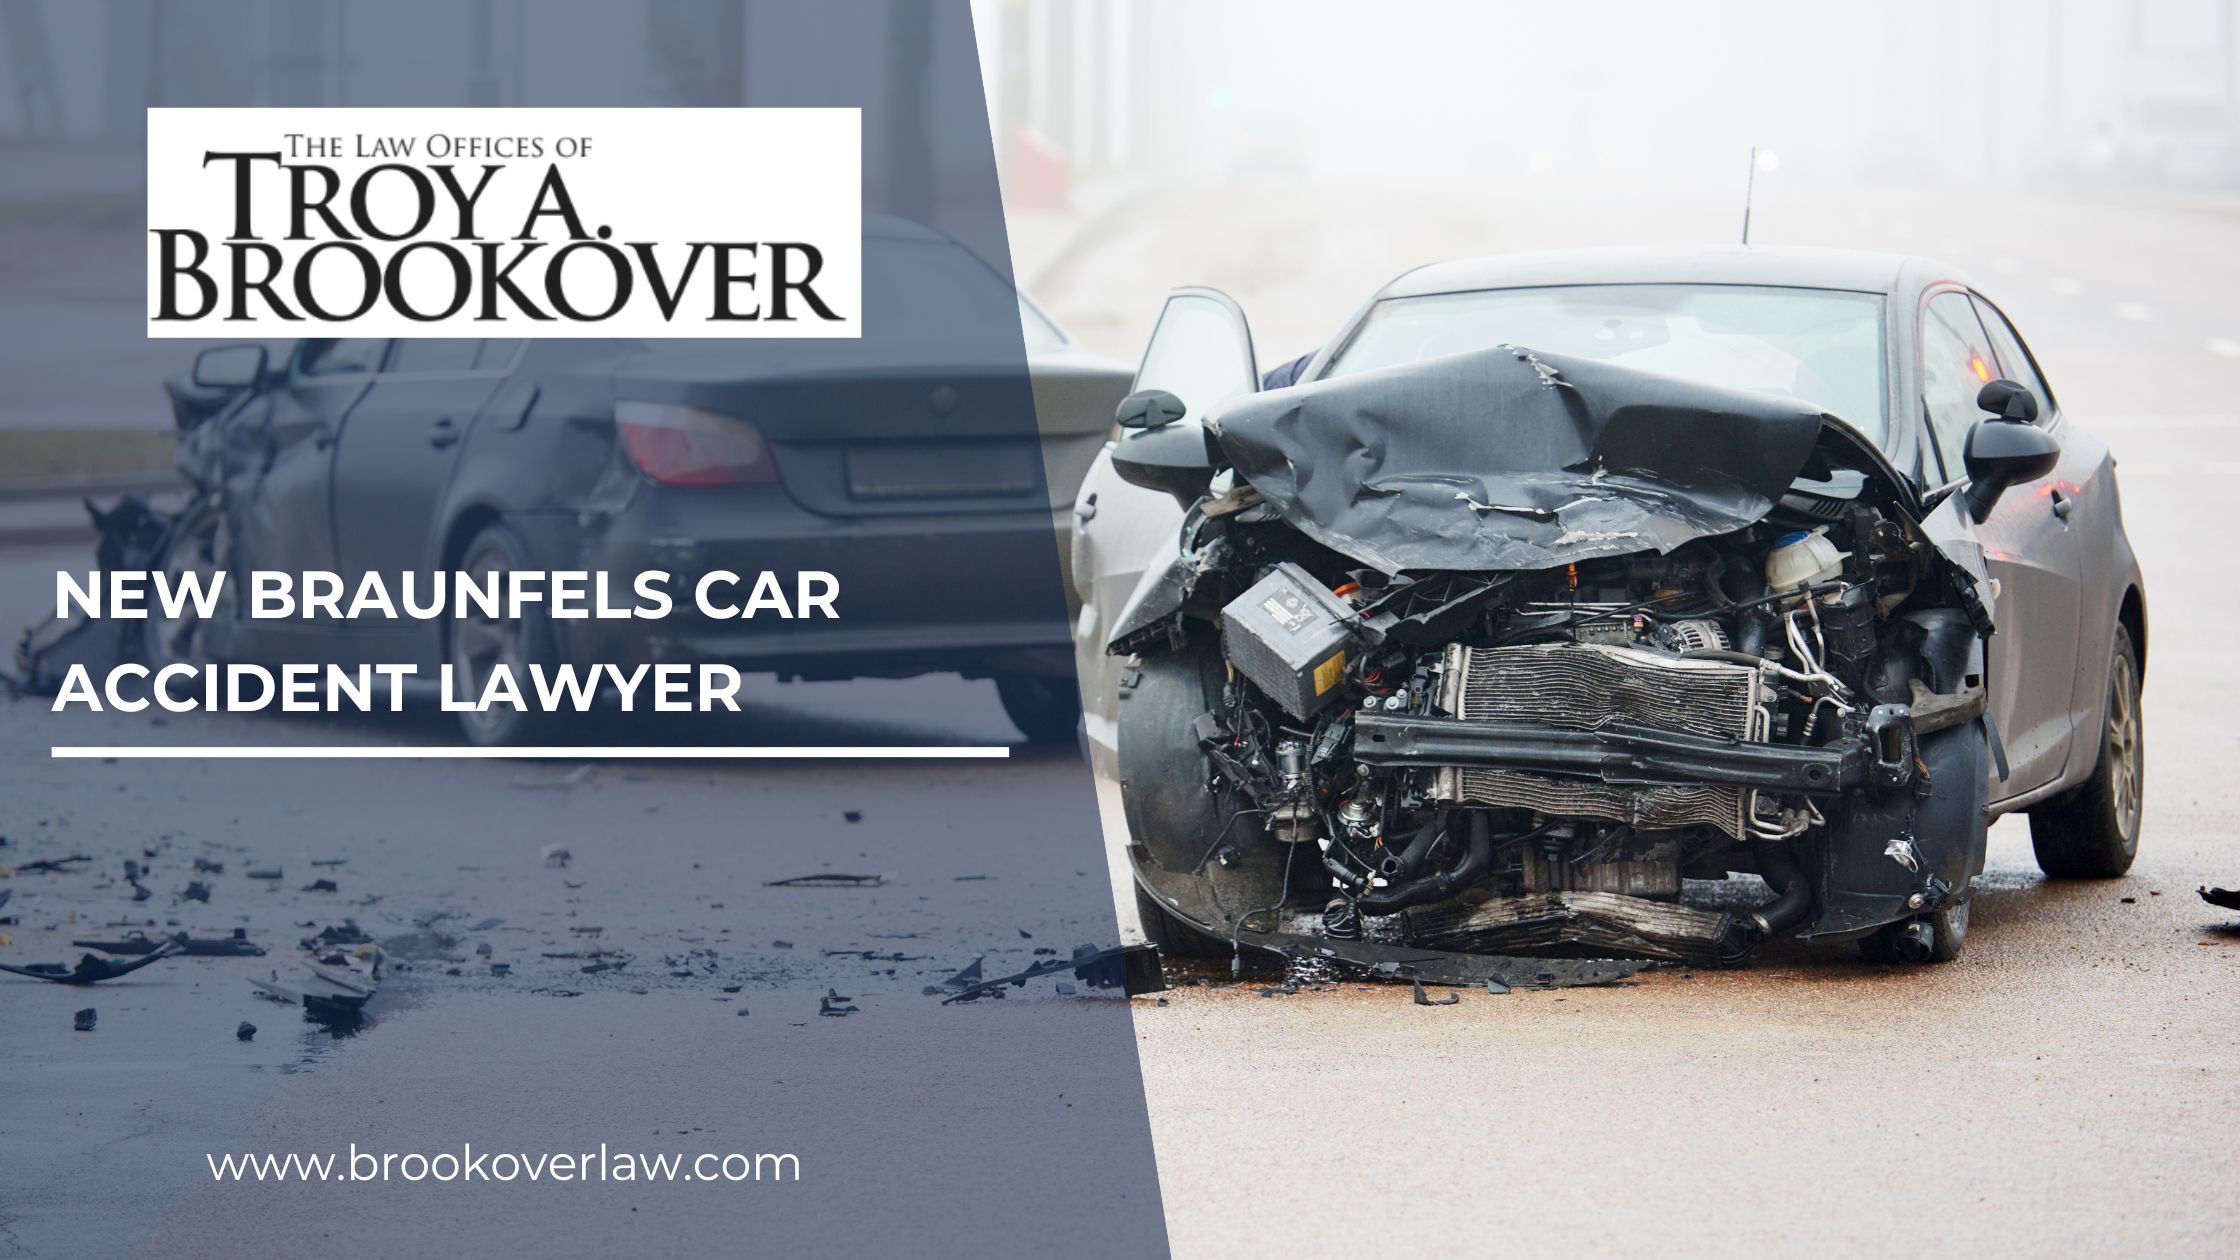 Banner showcasing The Law Offices of Troy A. Brookover with text 'New Braunfels Car Accident Lawyer' next to an image of a severely damaged car from a collision, representing legal assistance for car accidents.